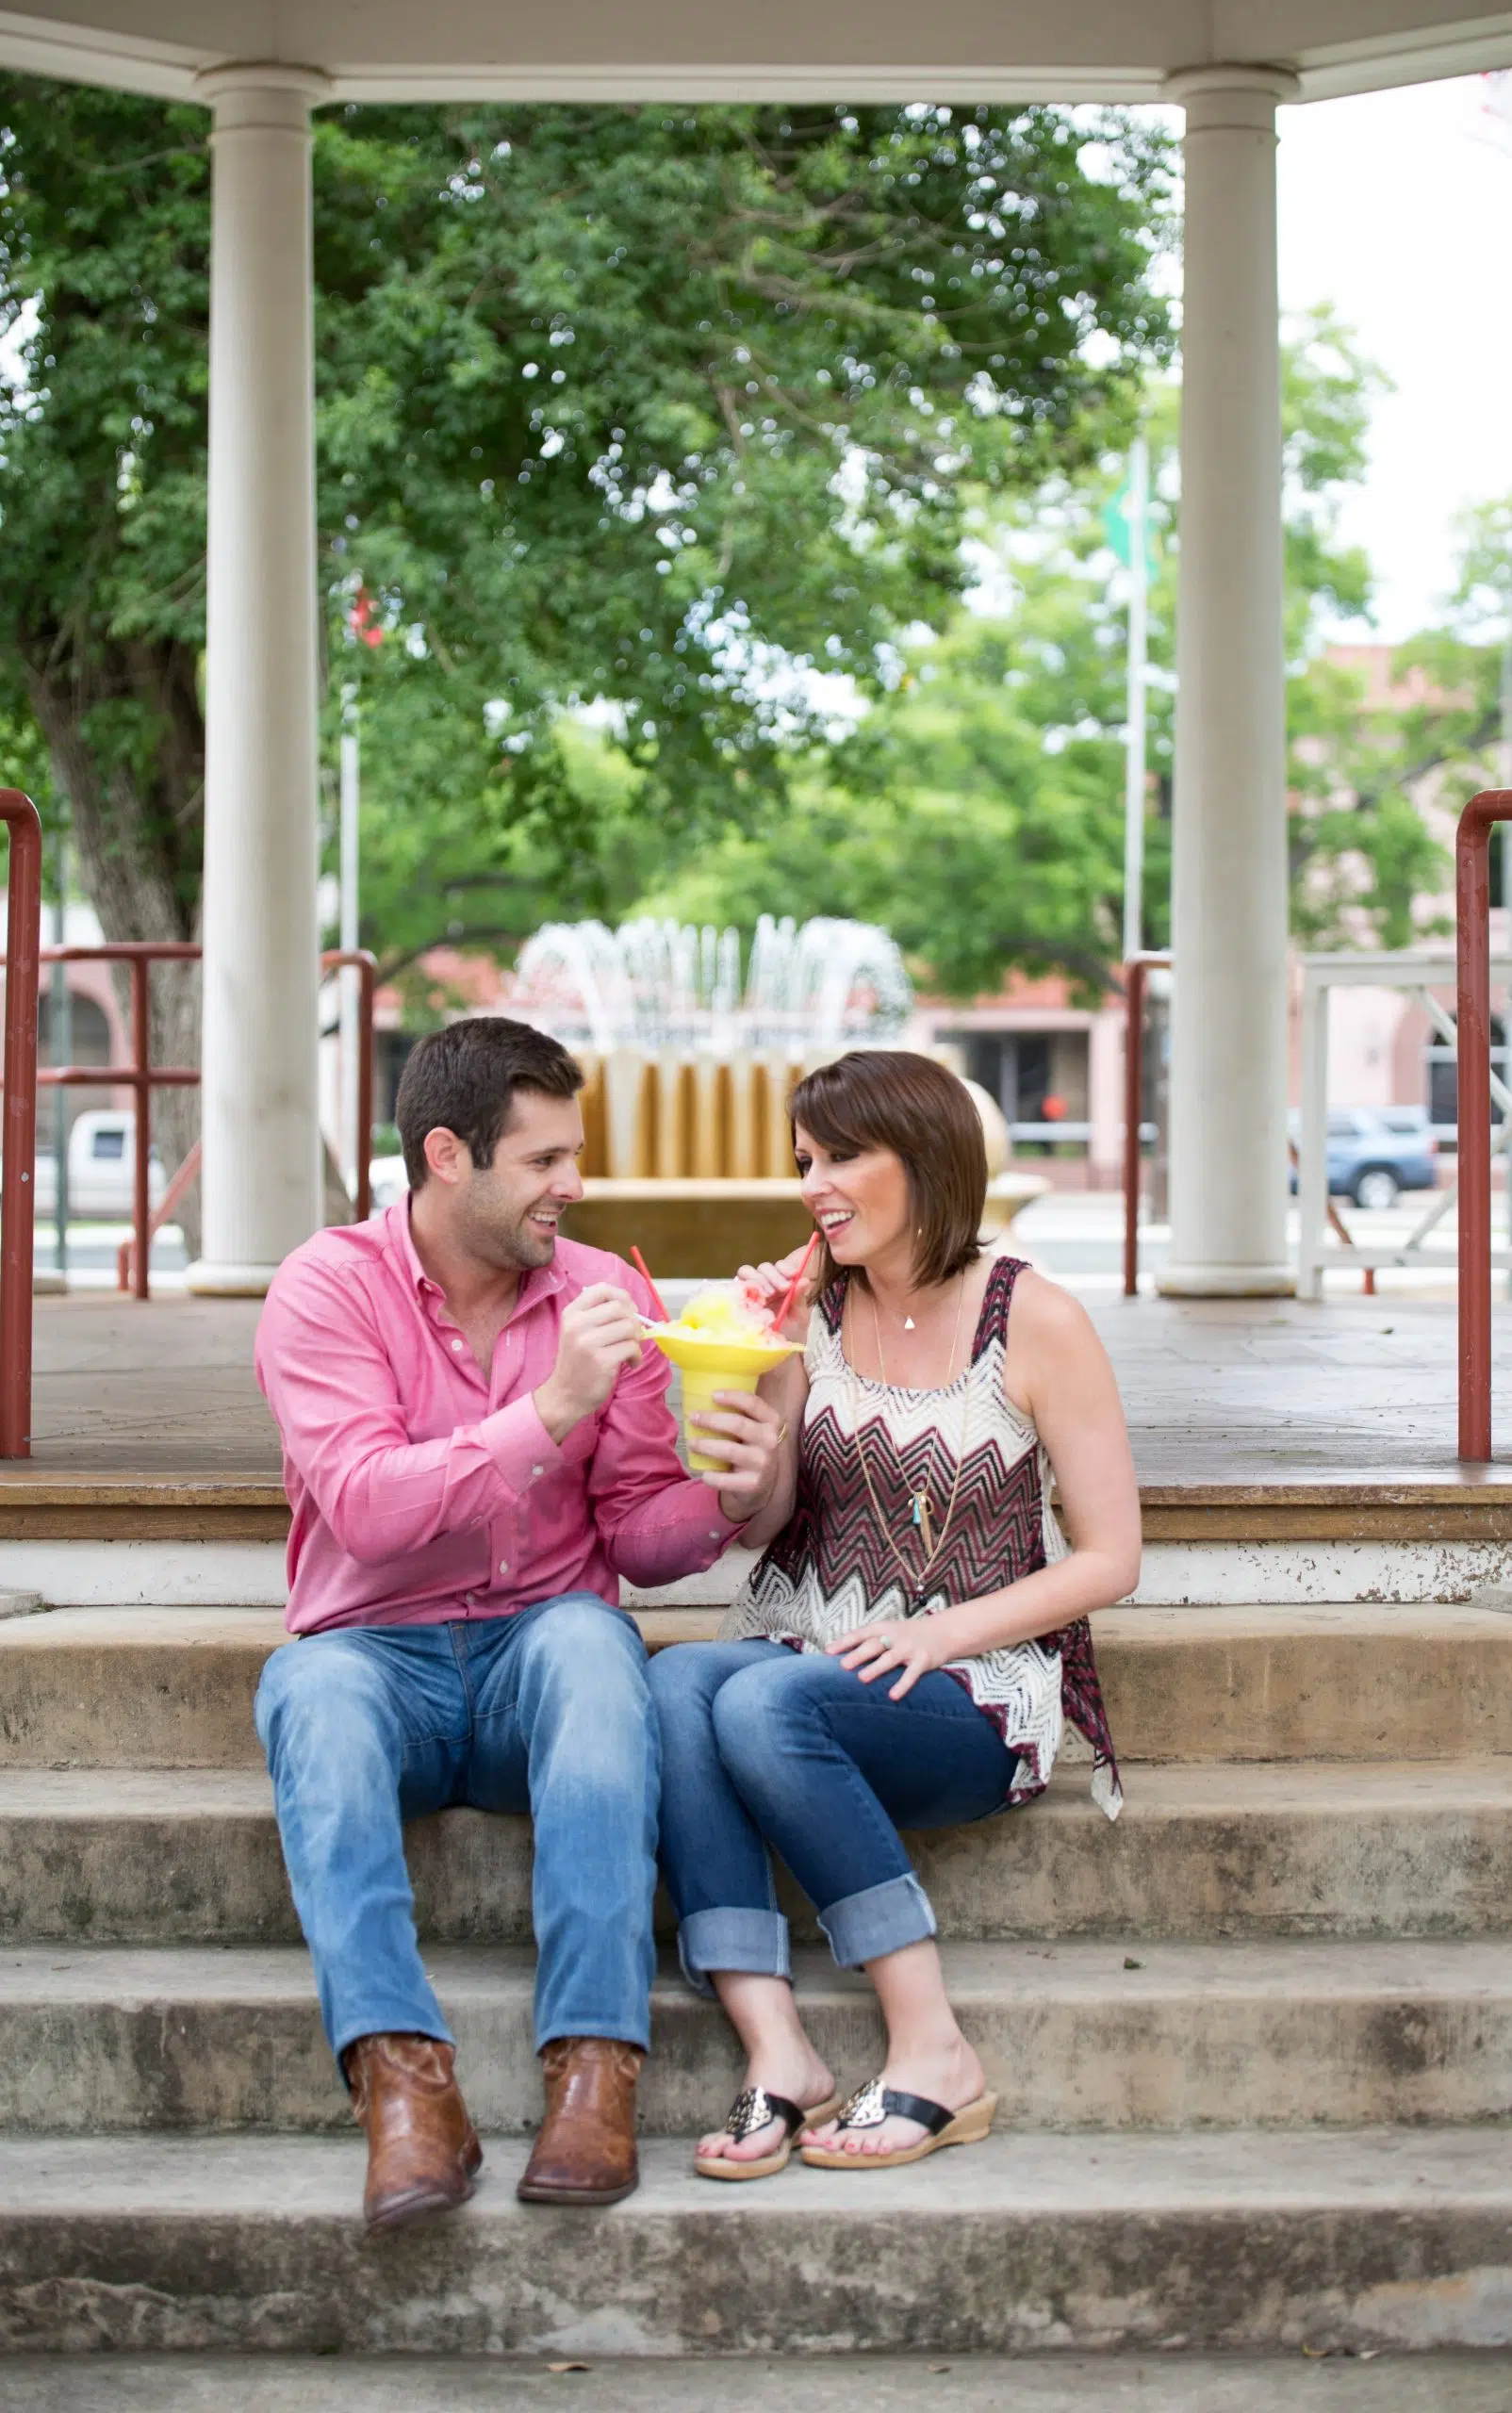 Plan the perfect date night in Downtown Seguin